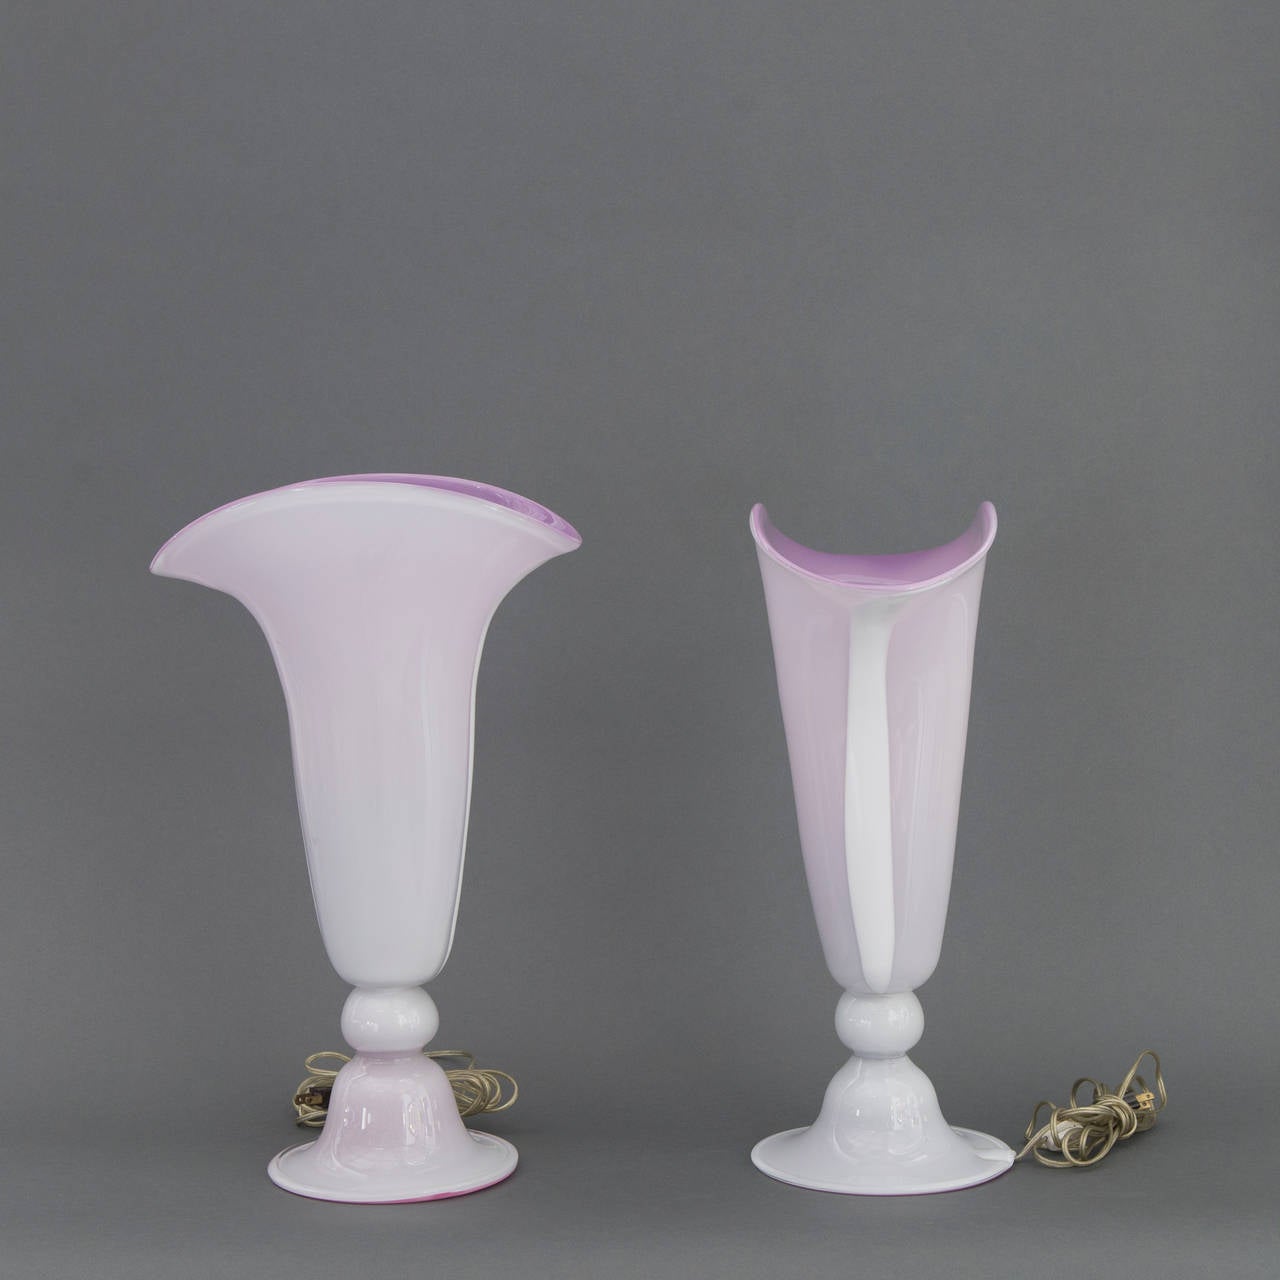 Italian Pink Exterior & Violet Interior Murano Blown Glass Floral Form Table Lamps, Pair For Sale